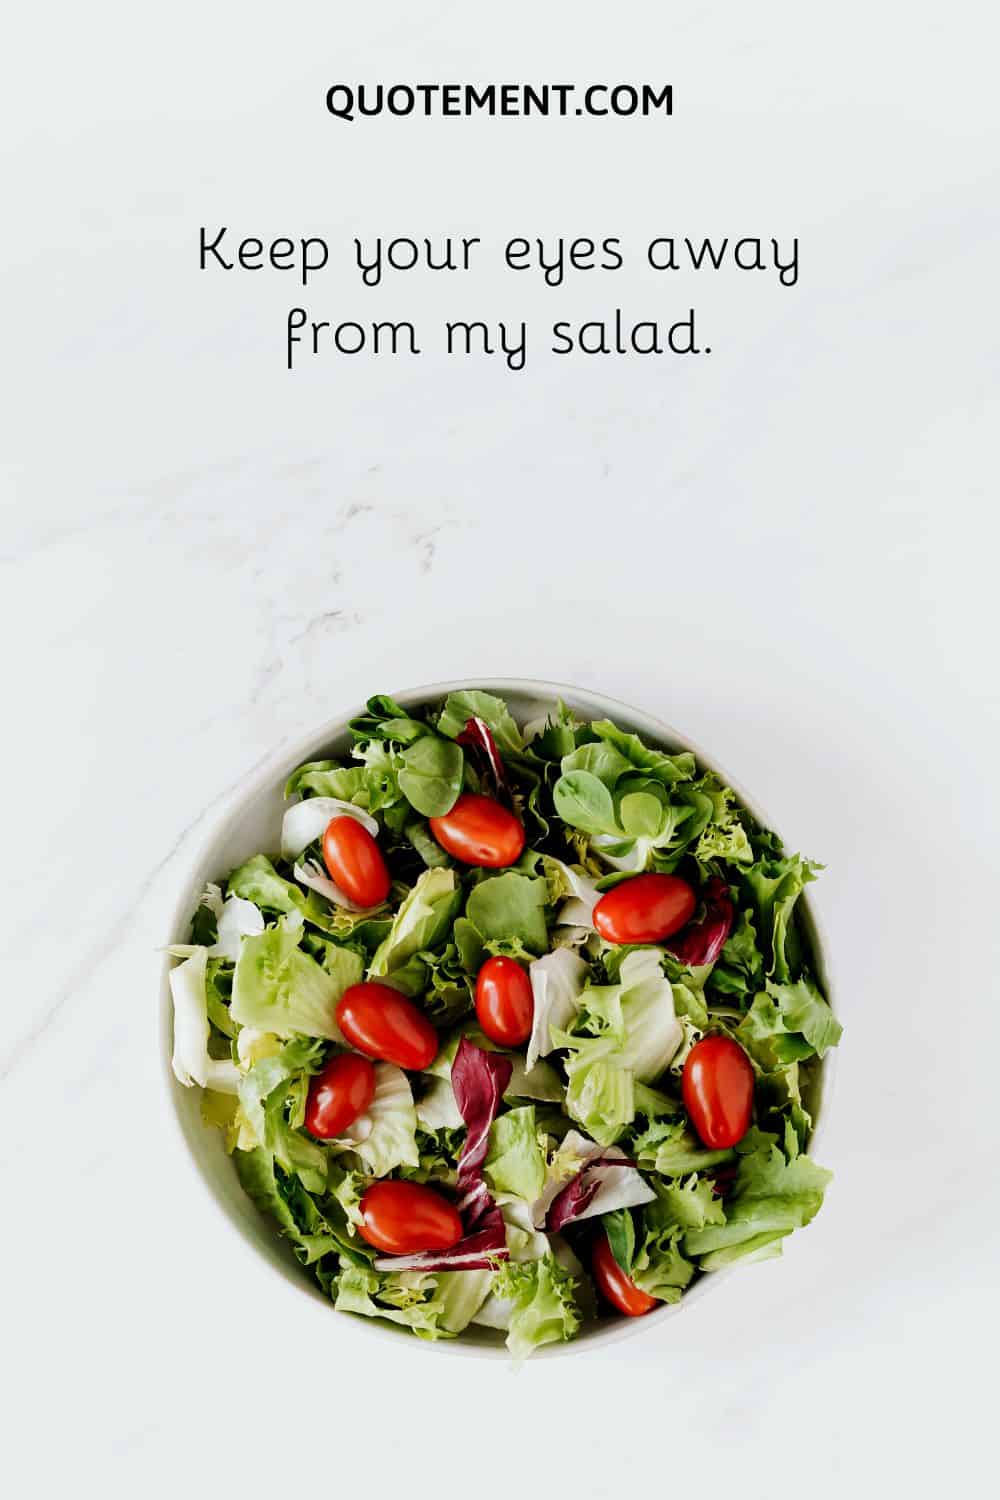 Keep your eyes away from my salad